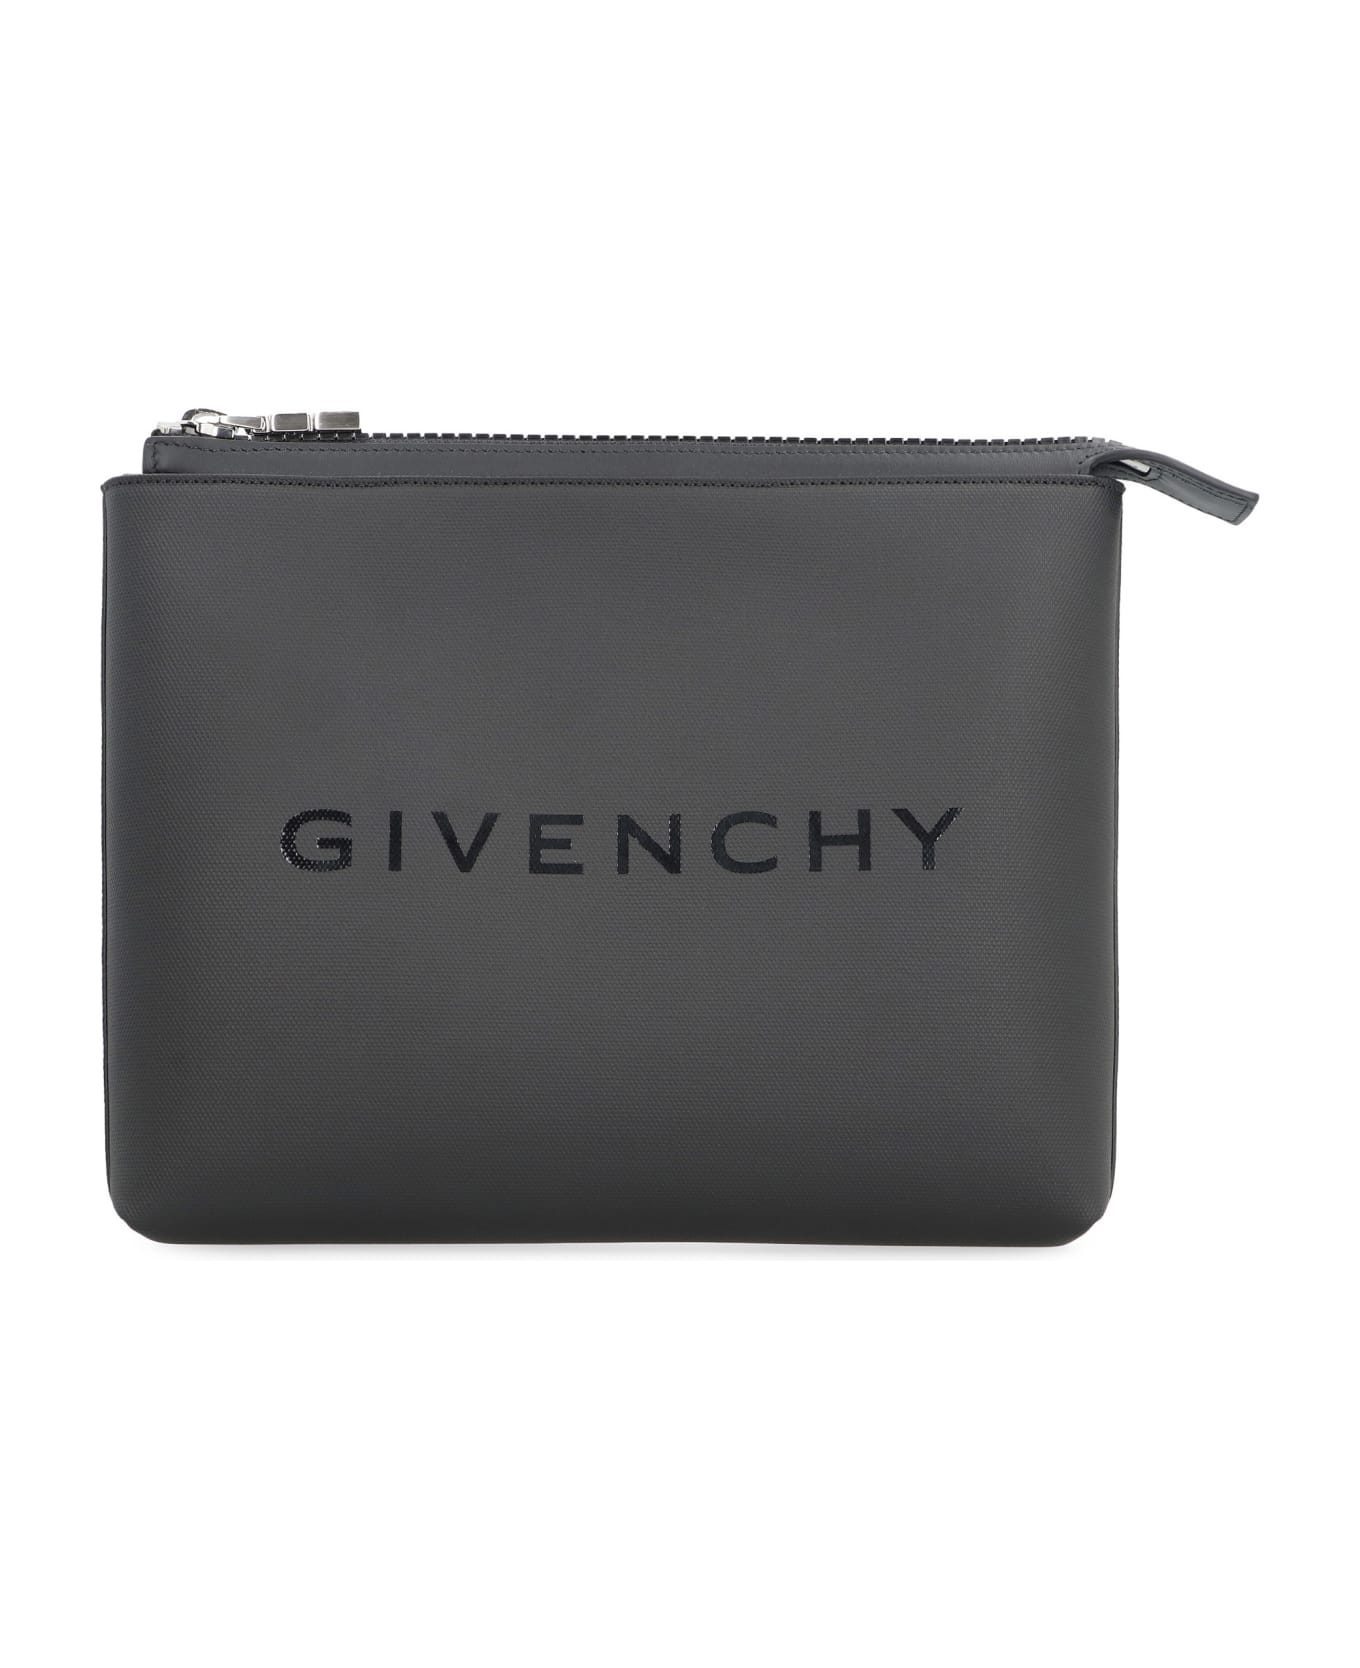 Givenchy Coated Canvas Flat Pouch - Black